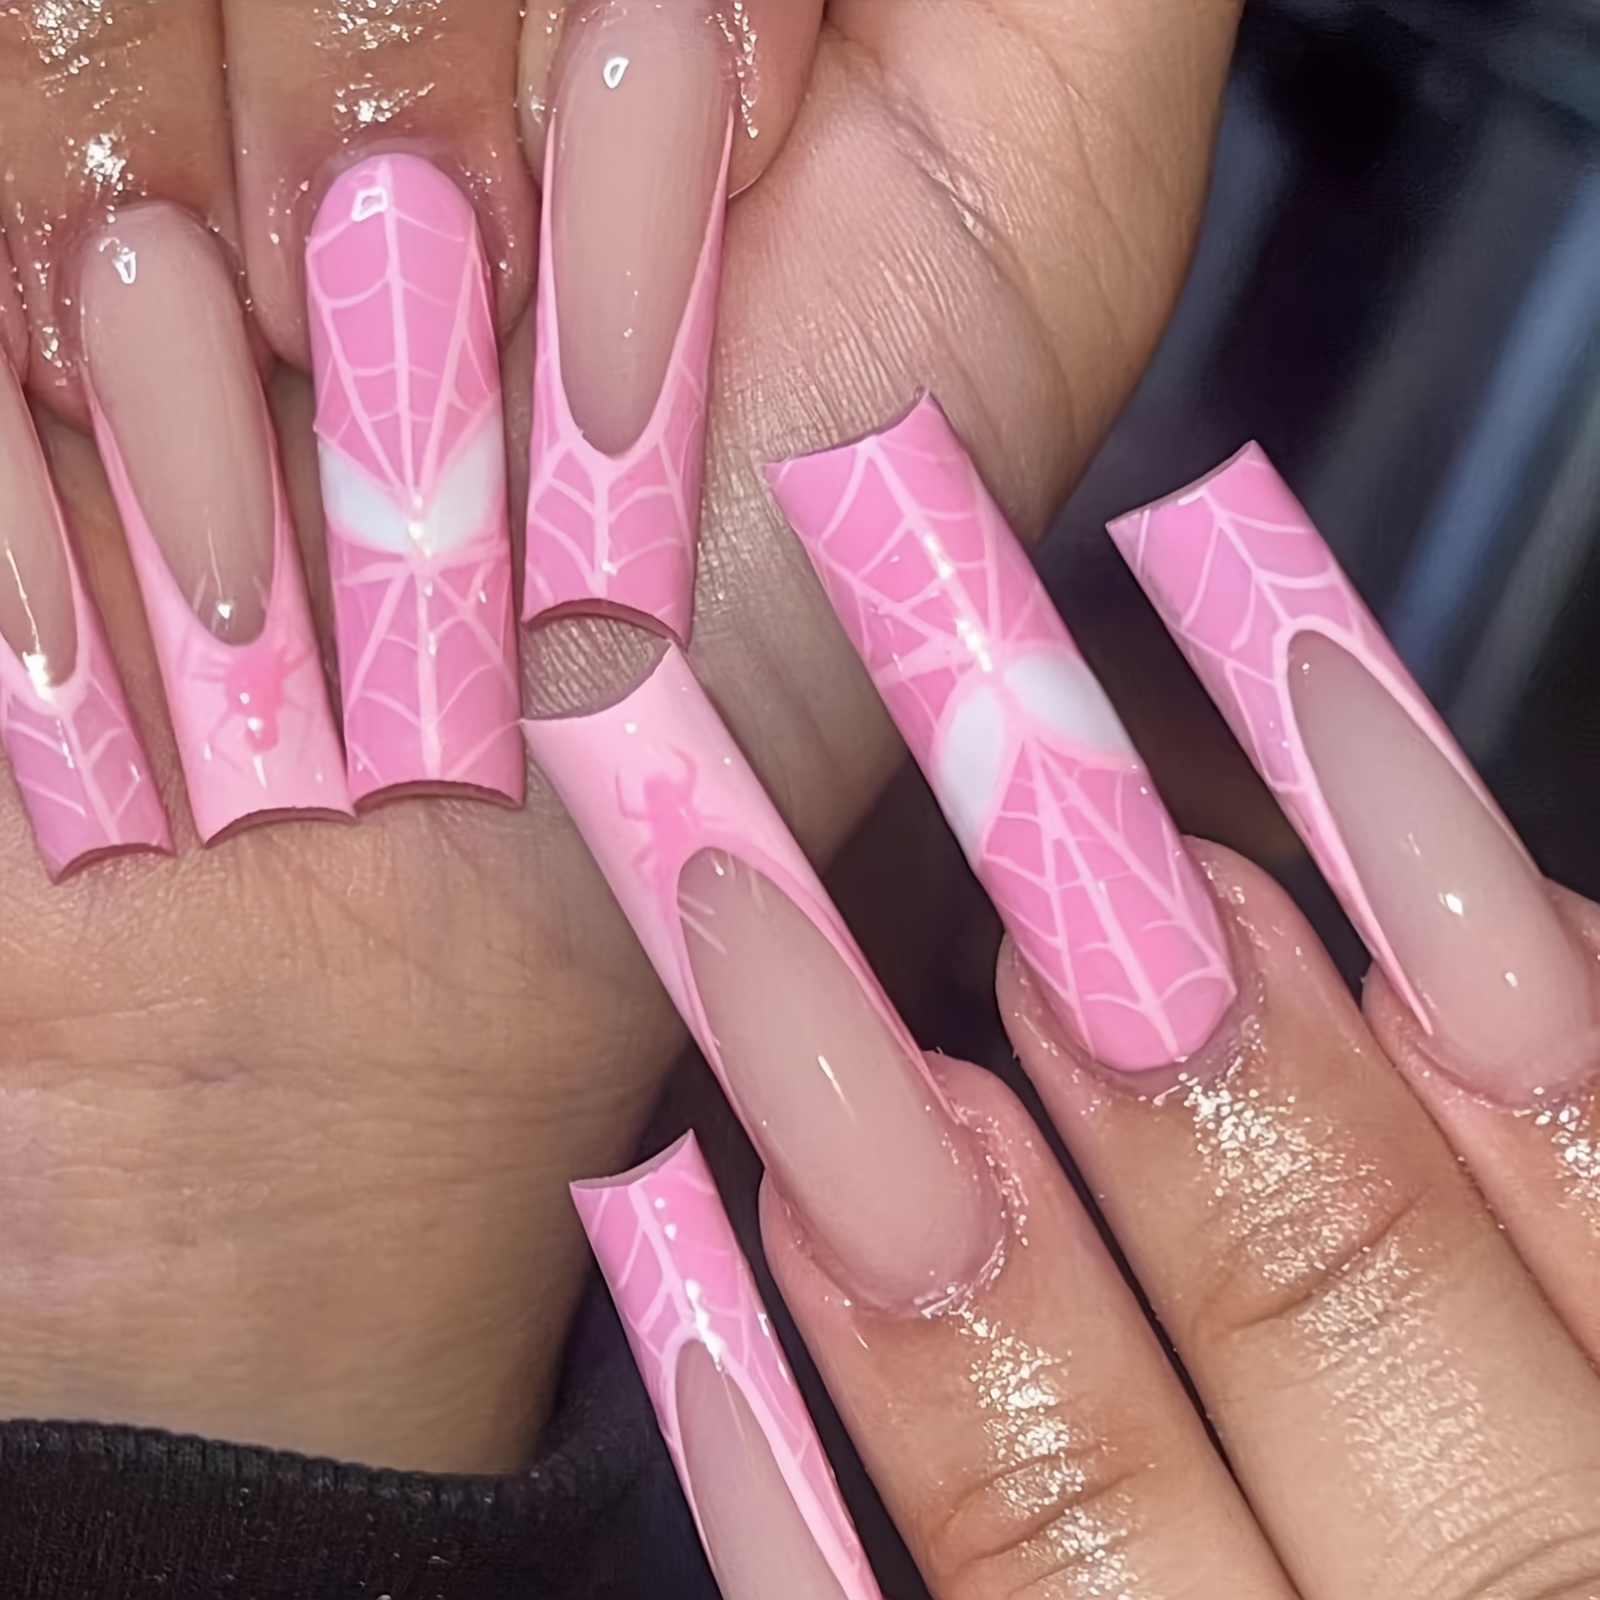 

Spiderweb Design Artificial Nail Tips, Pink Glossy Press-on Nails With Spider Accents, Full Cover Fake Nails For Diy Manicure, Fashion Nail Art, 10 Sizes, Salon Look